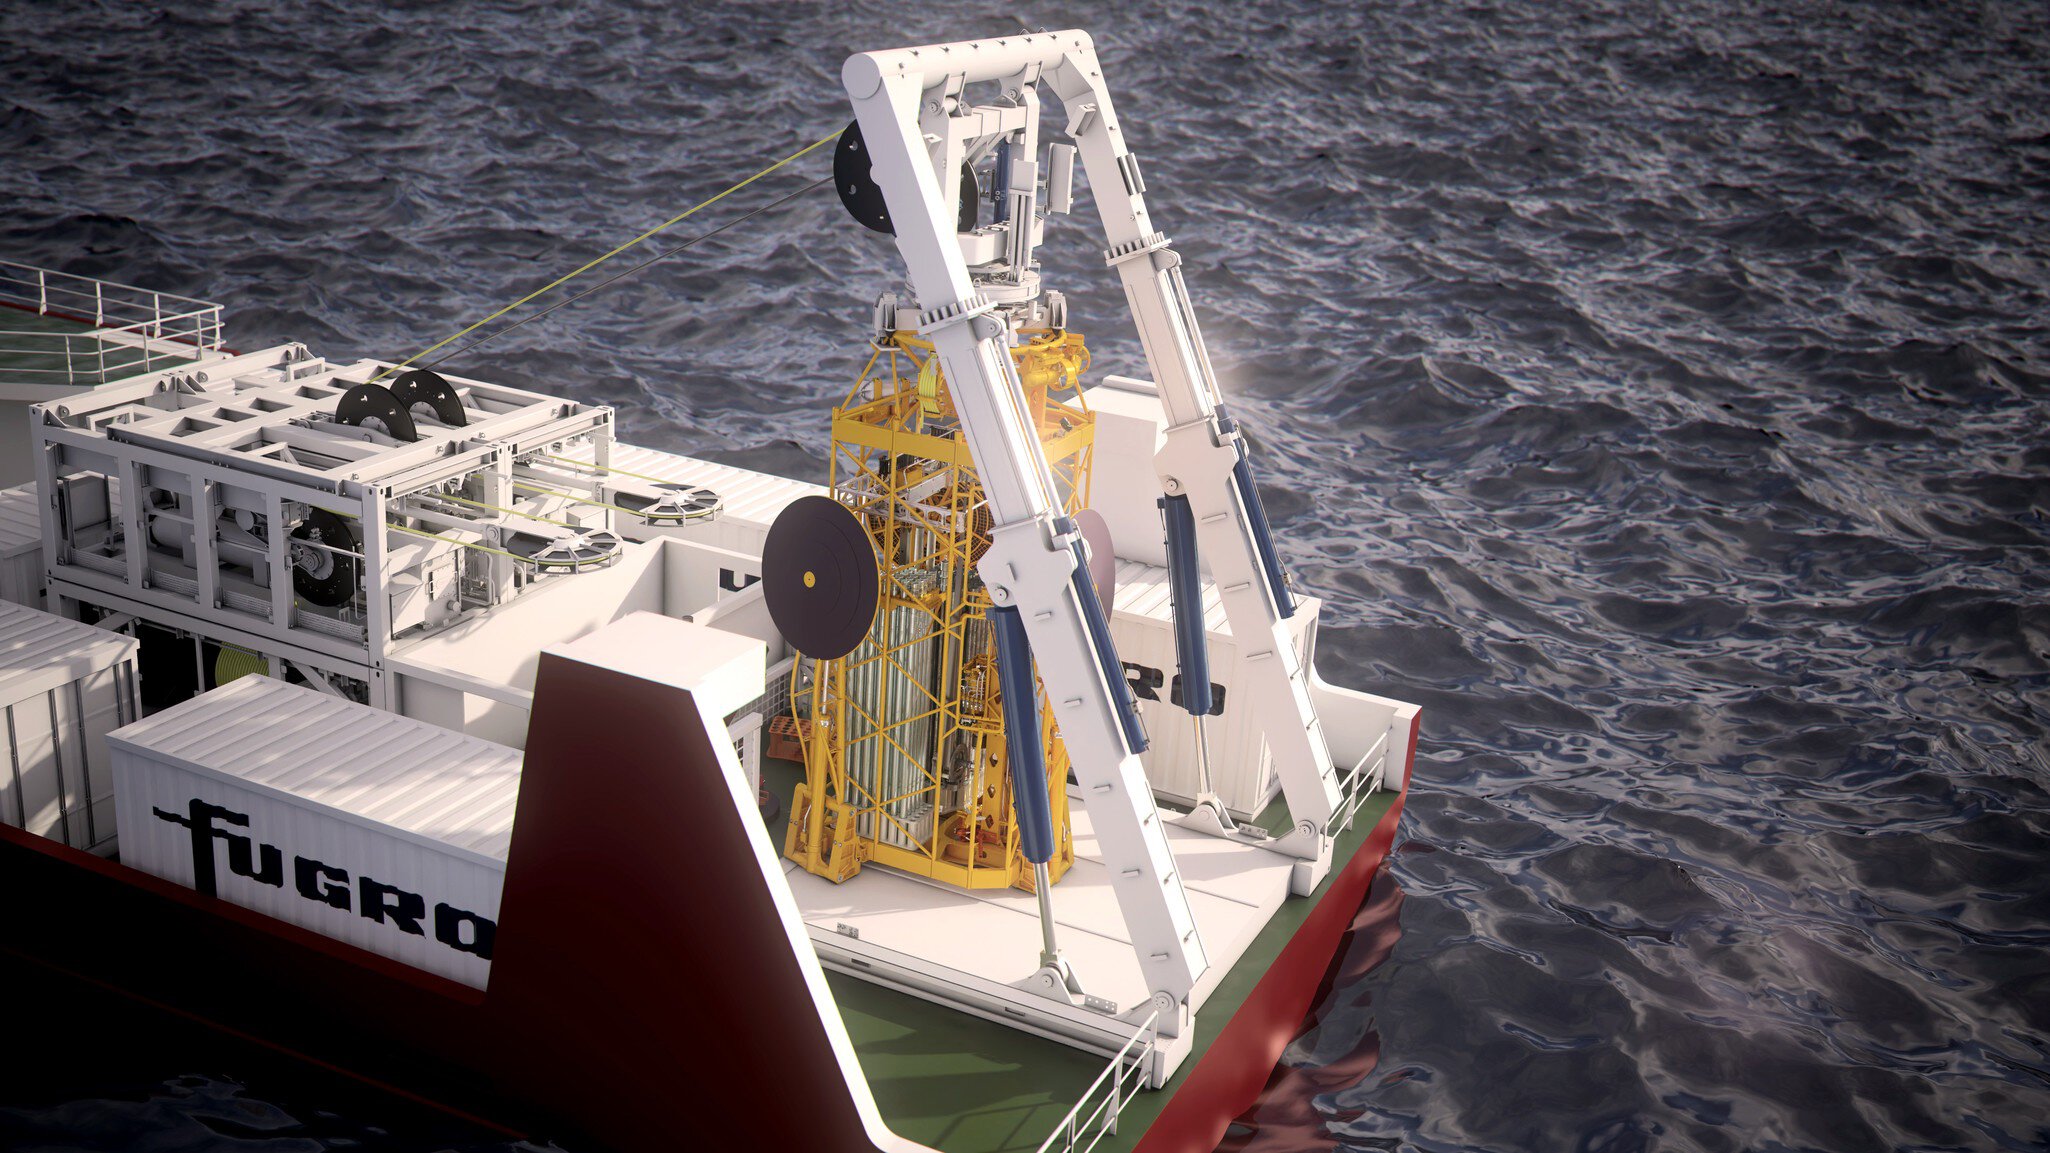 Fugro kicks off the Offshore Technology Conference with two Spotlight on New Technology Awards